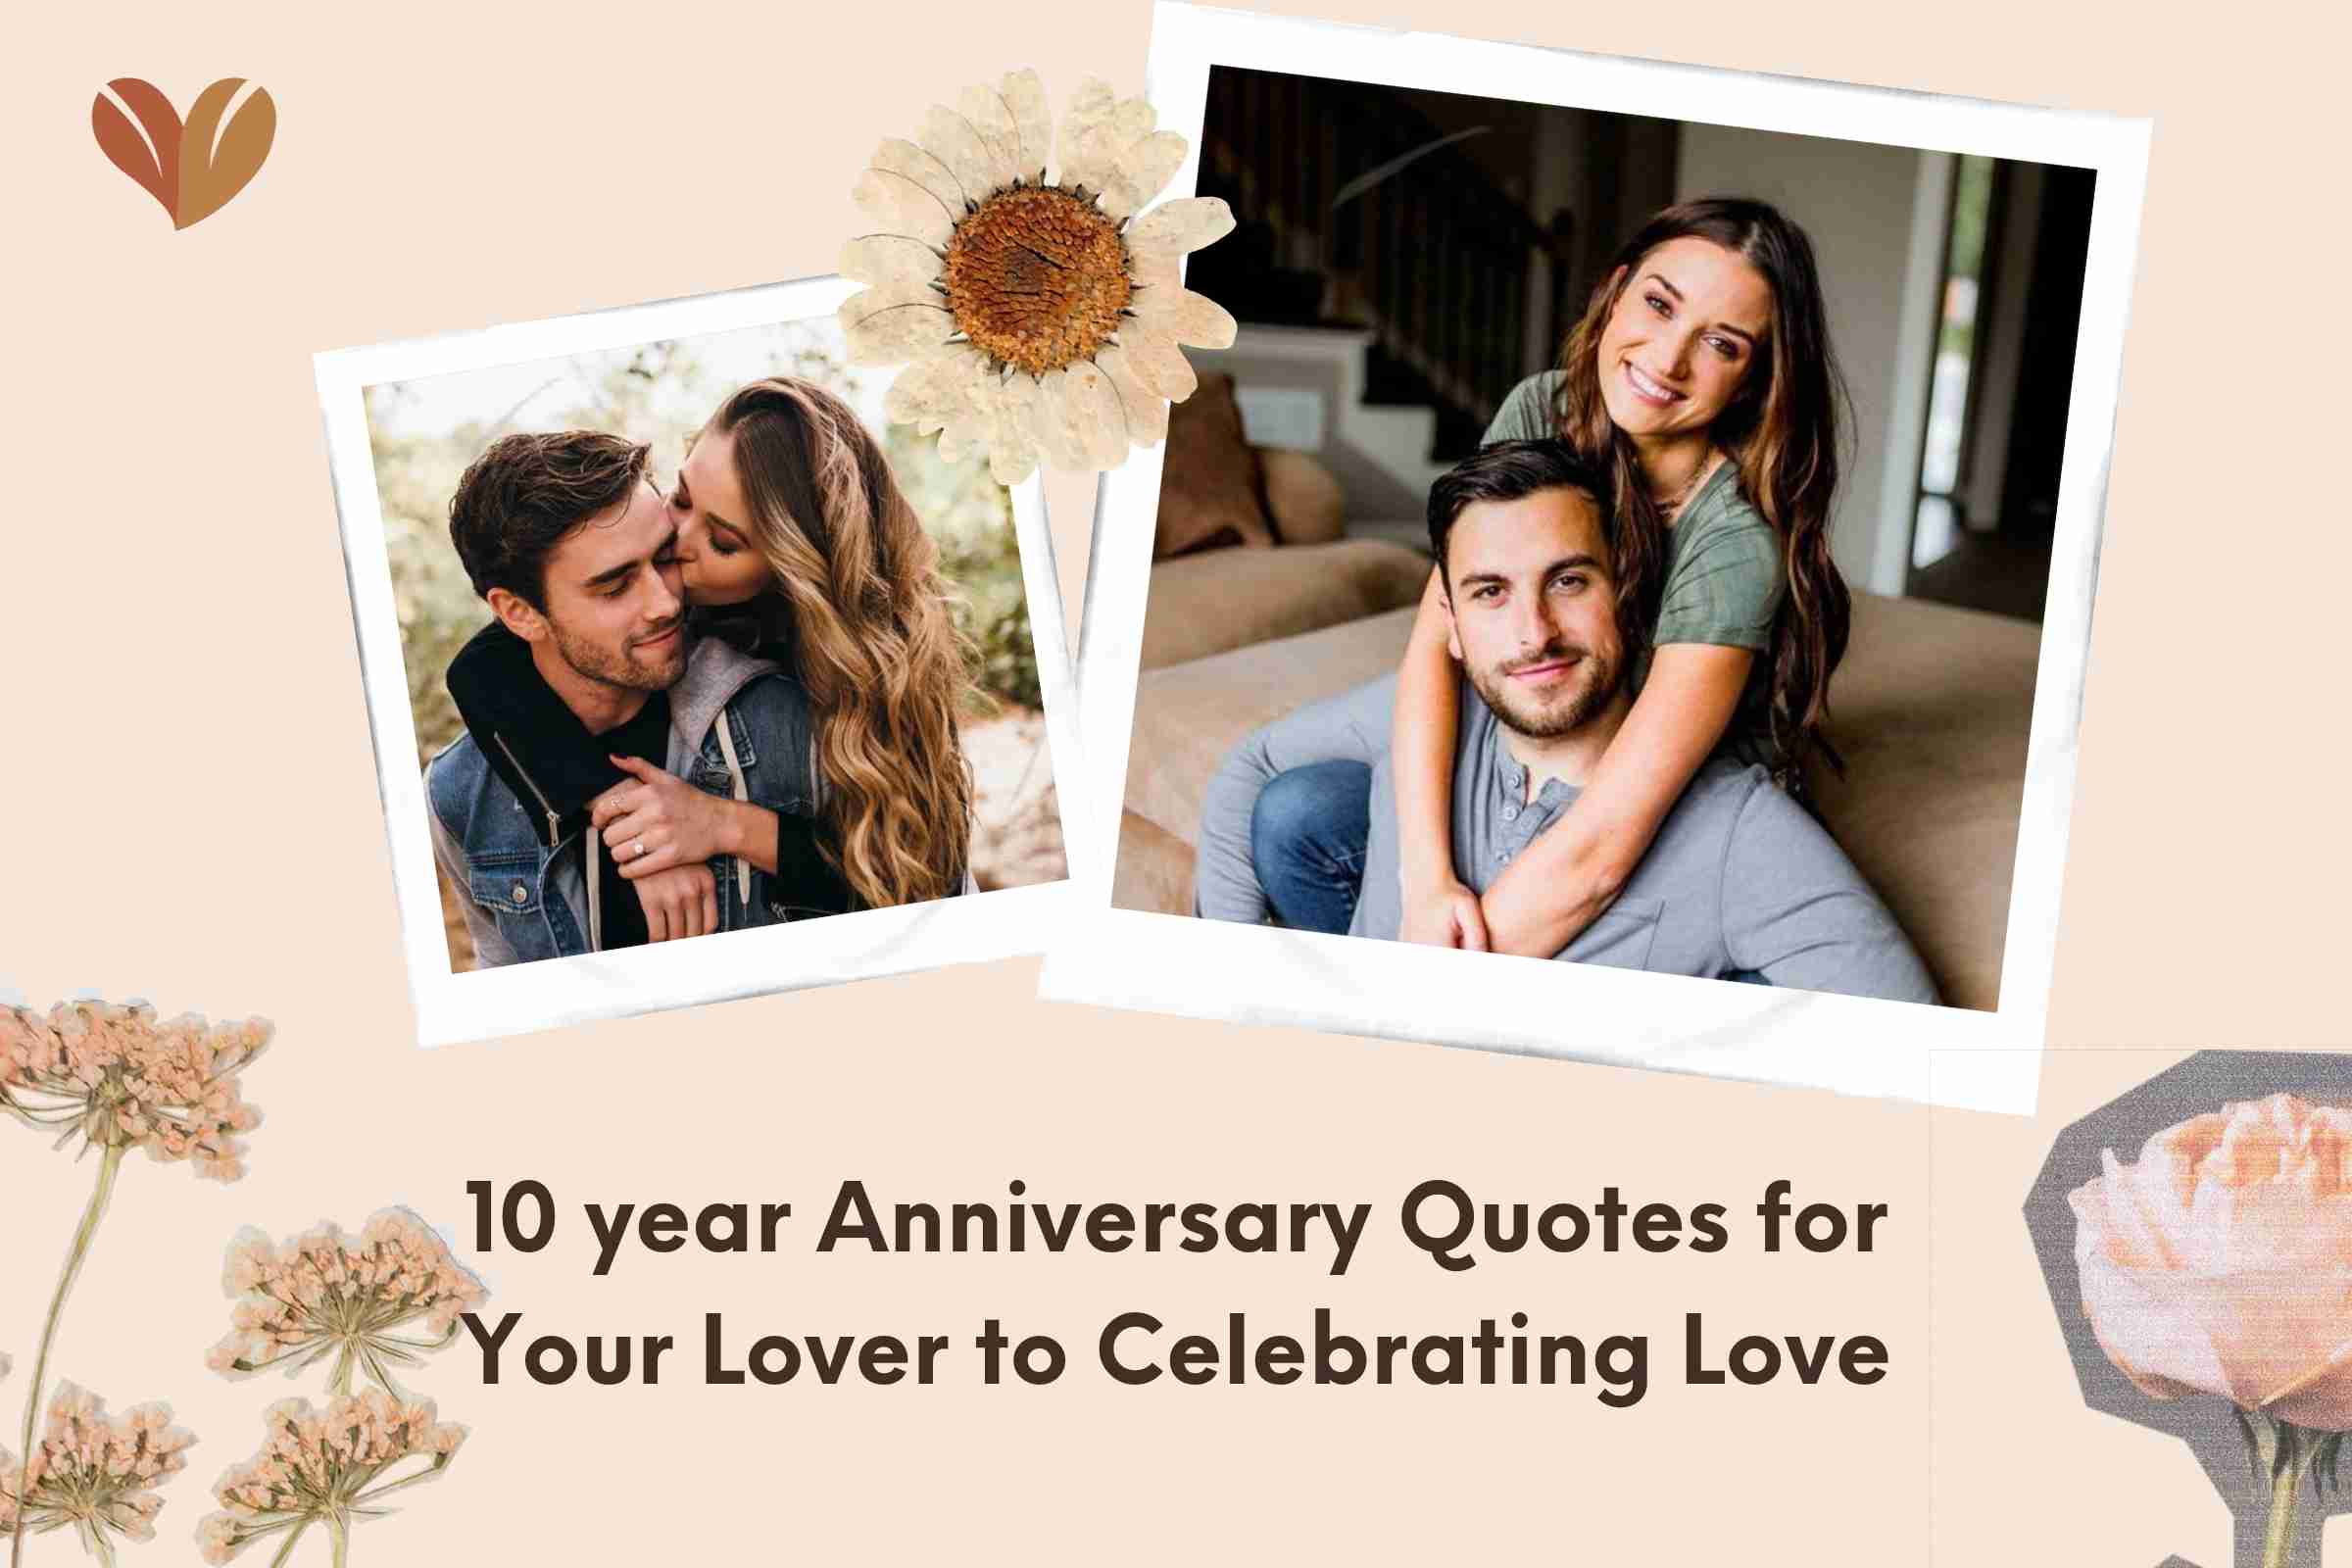 10 year Anniversary Quotes for Your Lover to Celebrating Love